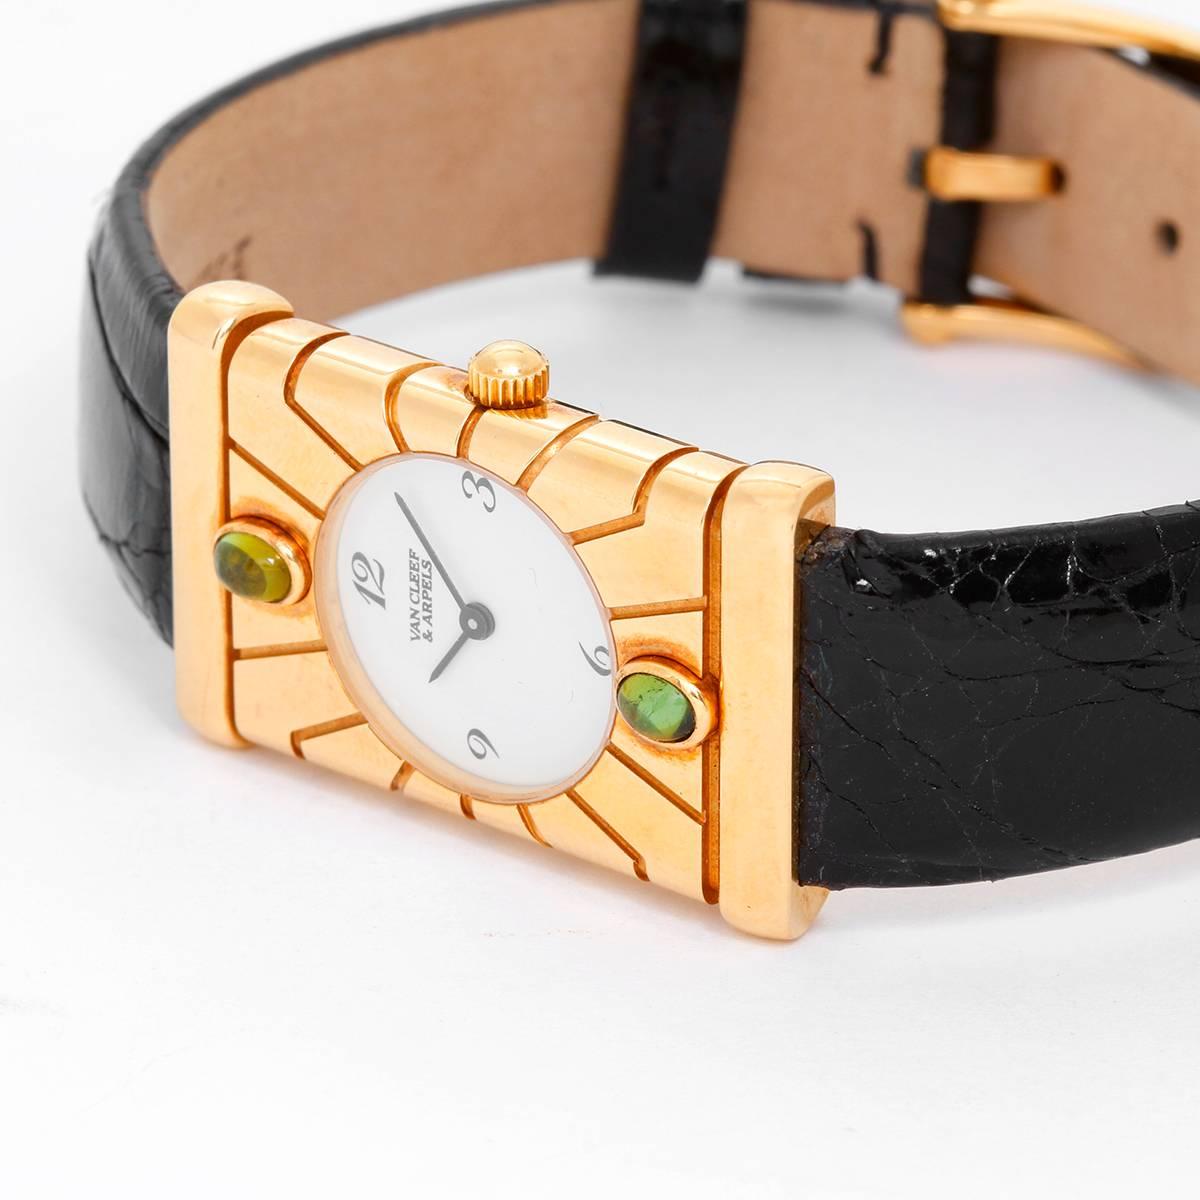 Van Cleef & Arpels Façade 18K Yellow Gold Vintage Watch -  Quartz. 18K Yellow Gold  (22 mm x 33 mm) with green tourmaline on bezel. White dial with  Arabic numerals. Black strap bracelet. Pre-owned with original Van Cleef & Arpels box.